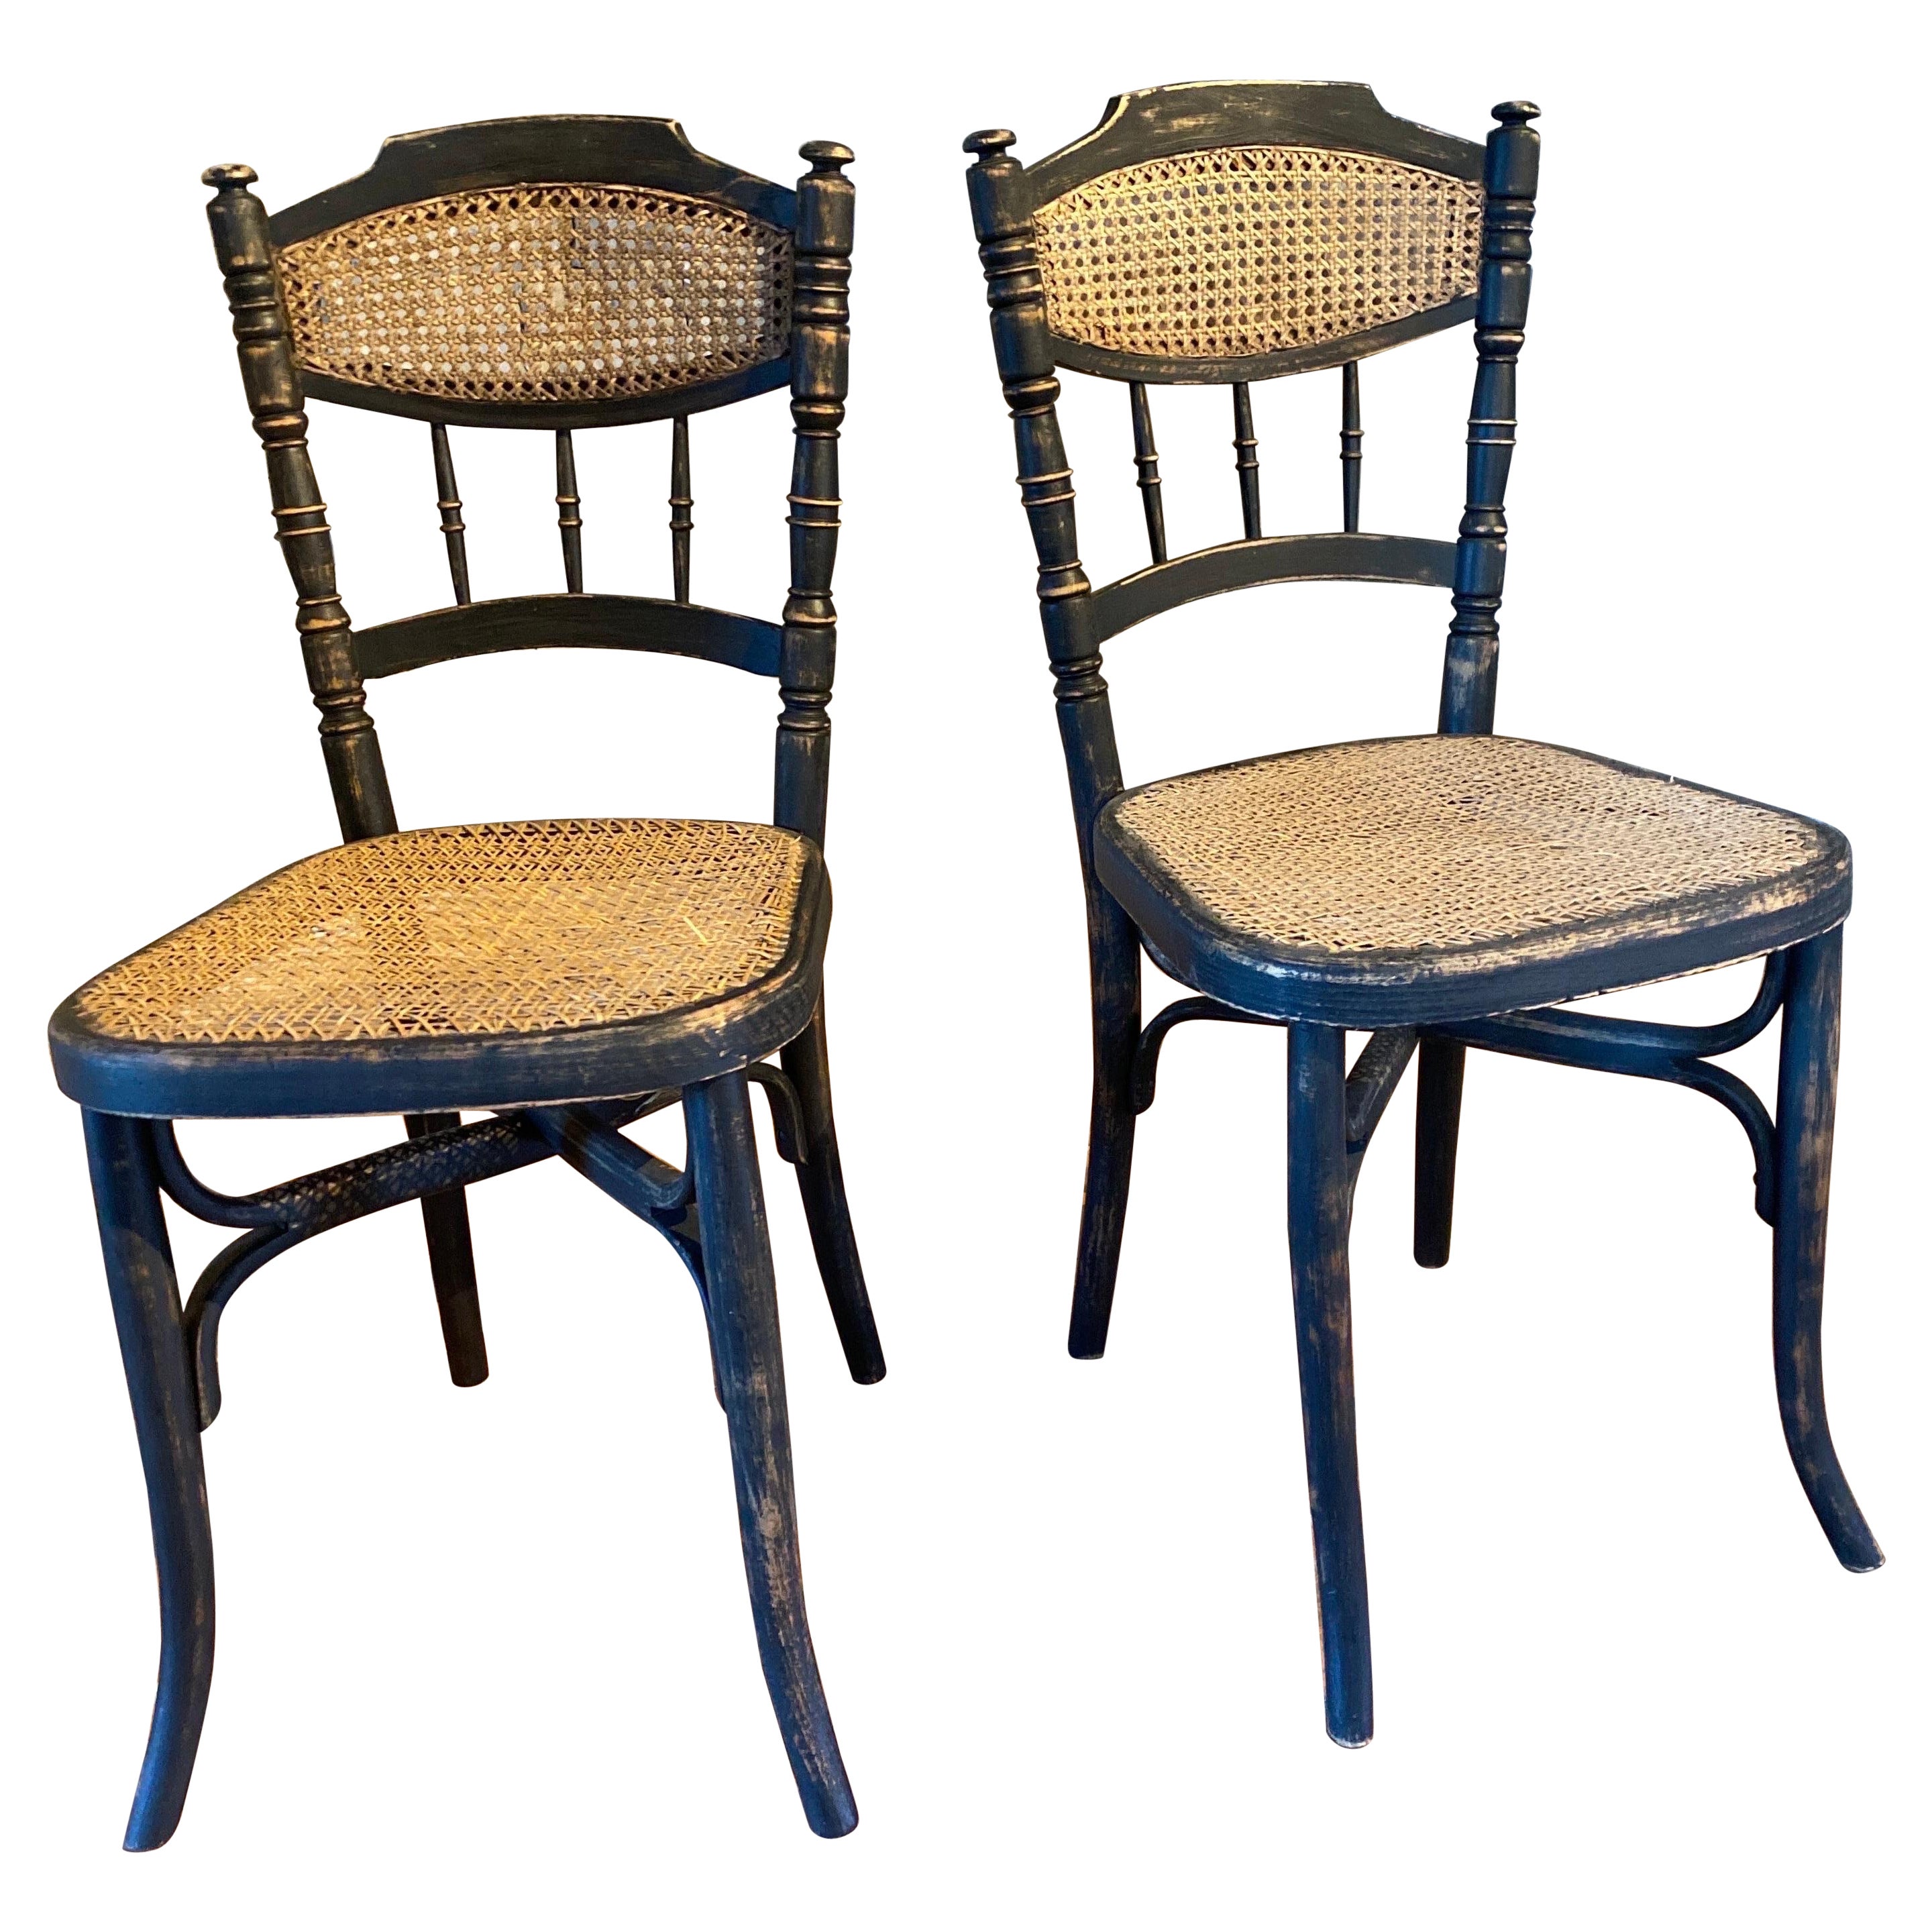 Pair of thonet style chairs year 1900 For Sale